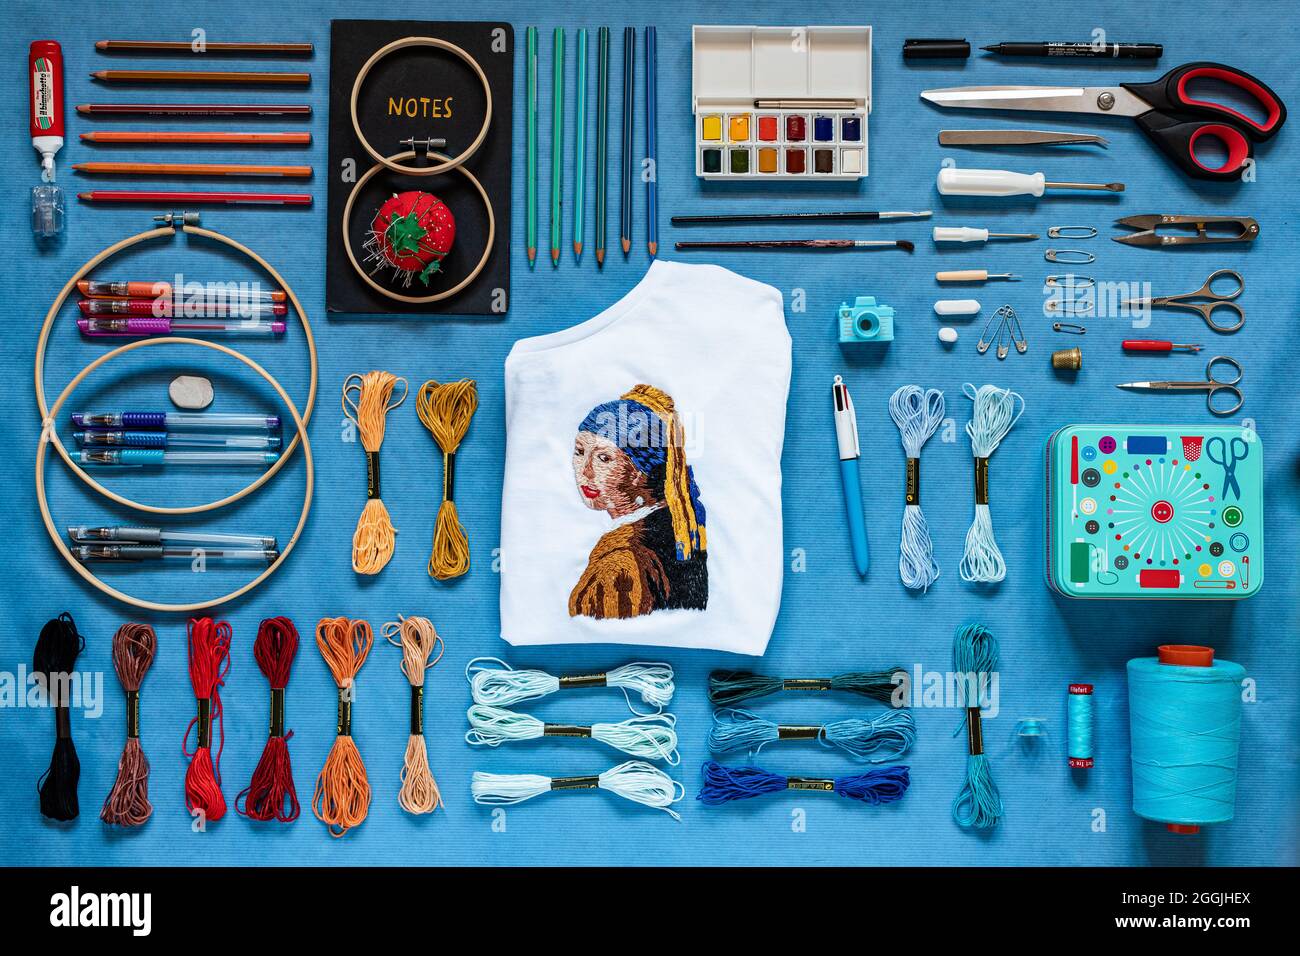 FROSINONE, ITALY - Aug 01, 2021: An embroidered portrait of the girl with the pearl earring with embroidery tools and threads on a blue surface Stock Photo